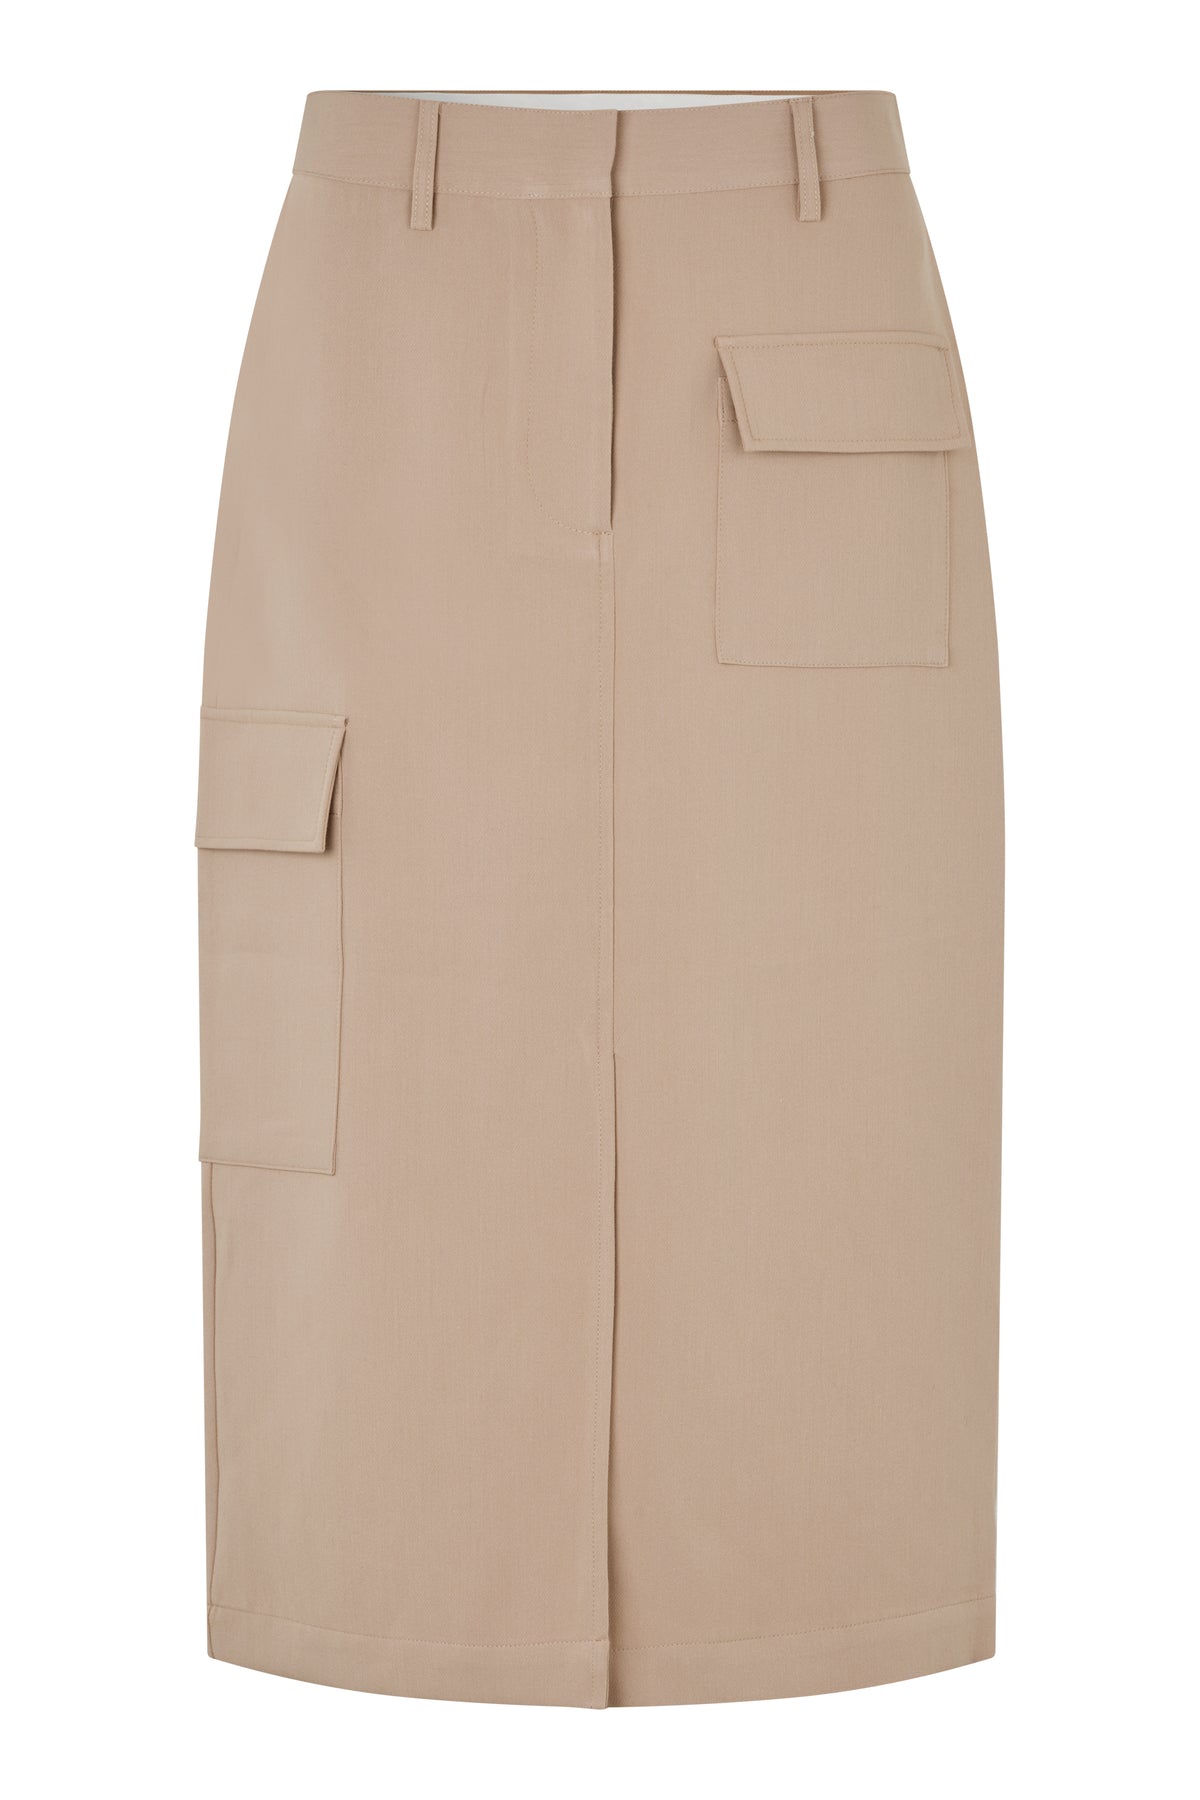 Beige pencil skirt with side pockets and front split